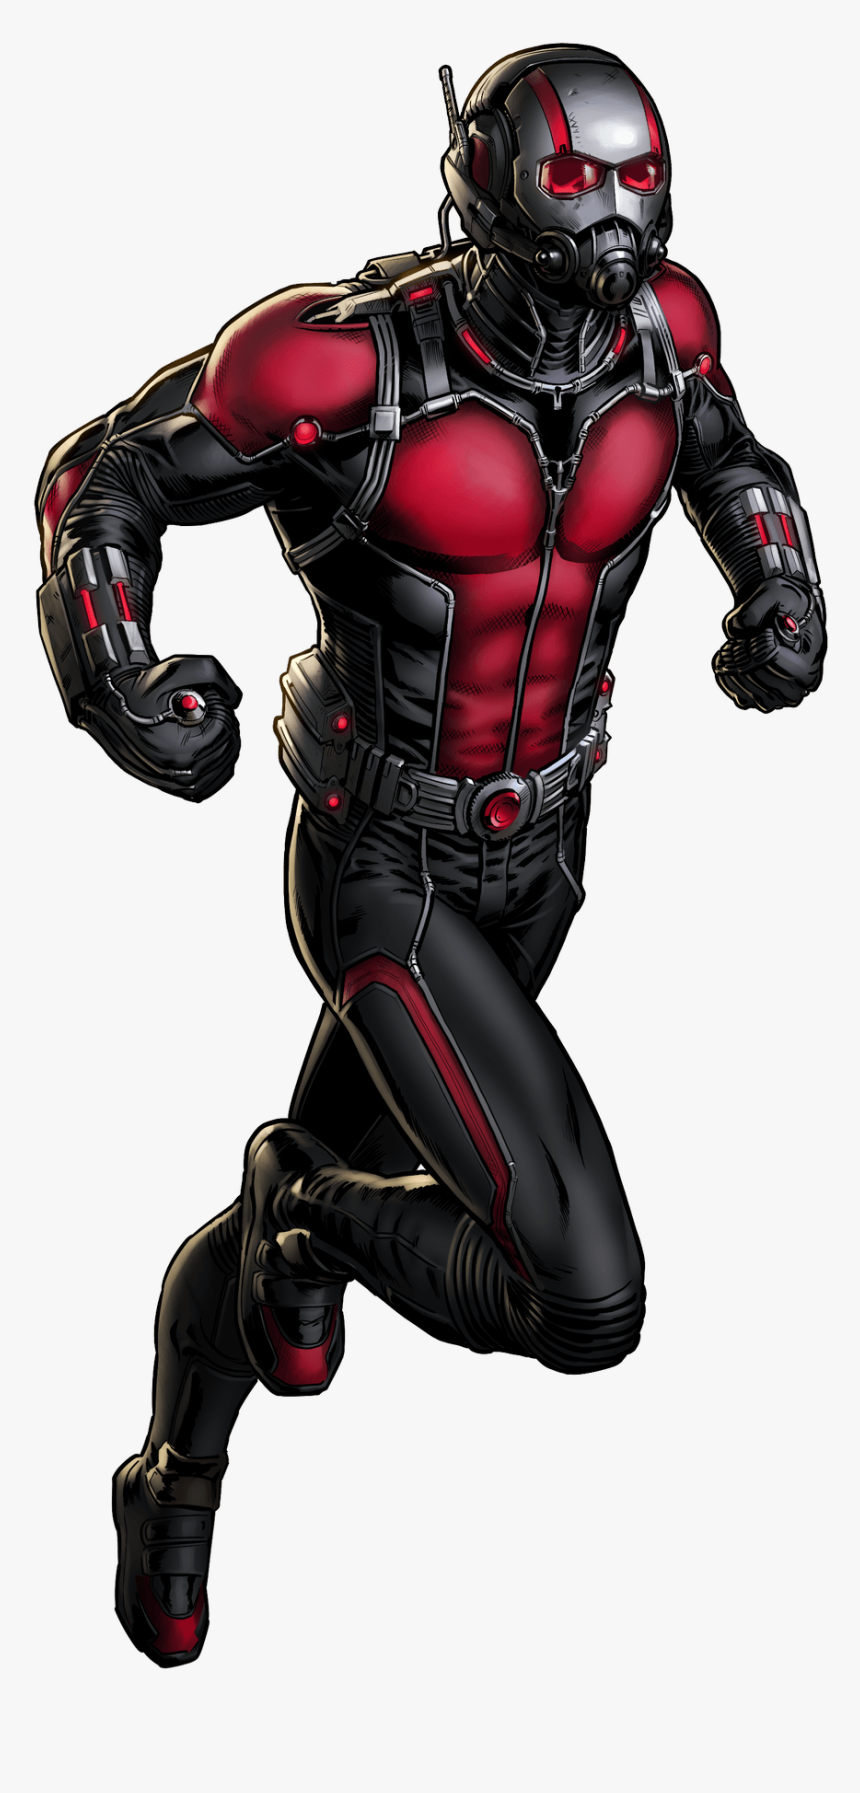 Ant Man Running - Ant Man Marvel Avengers Alliance, HD Png Download, Free Download